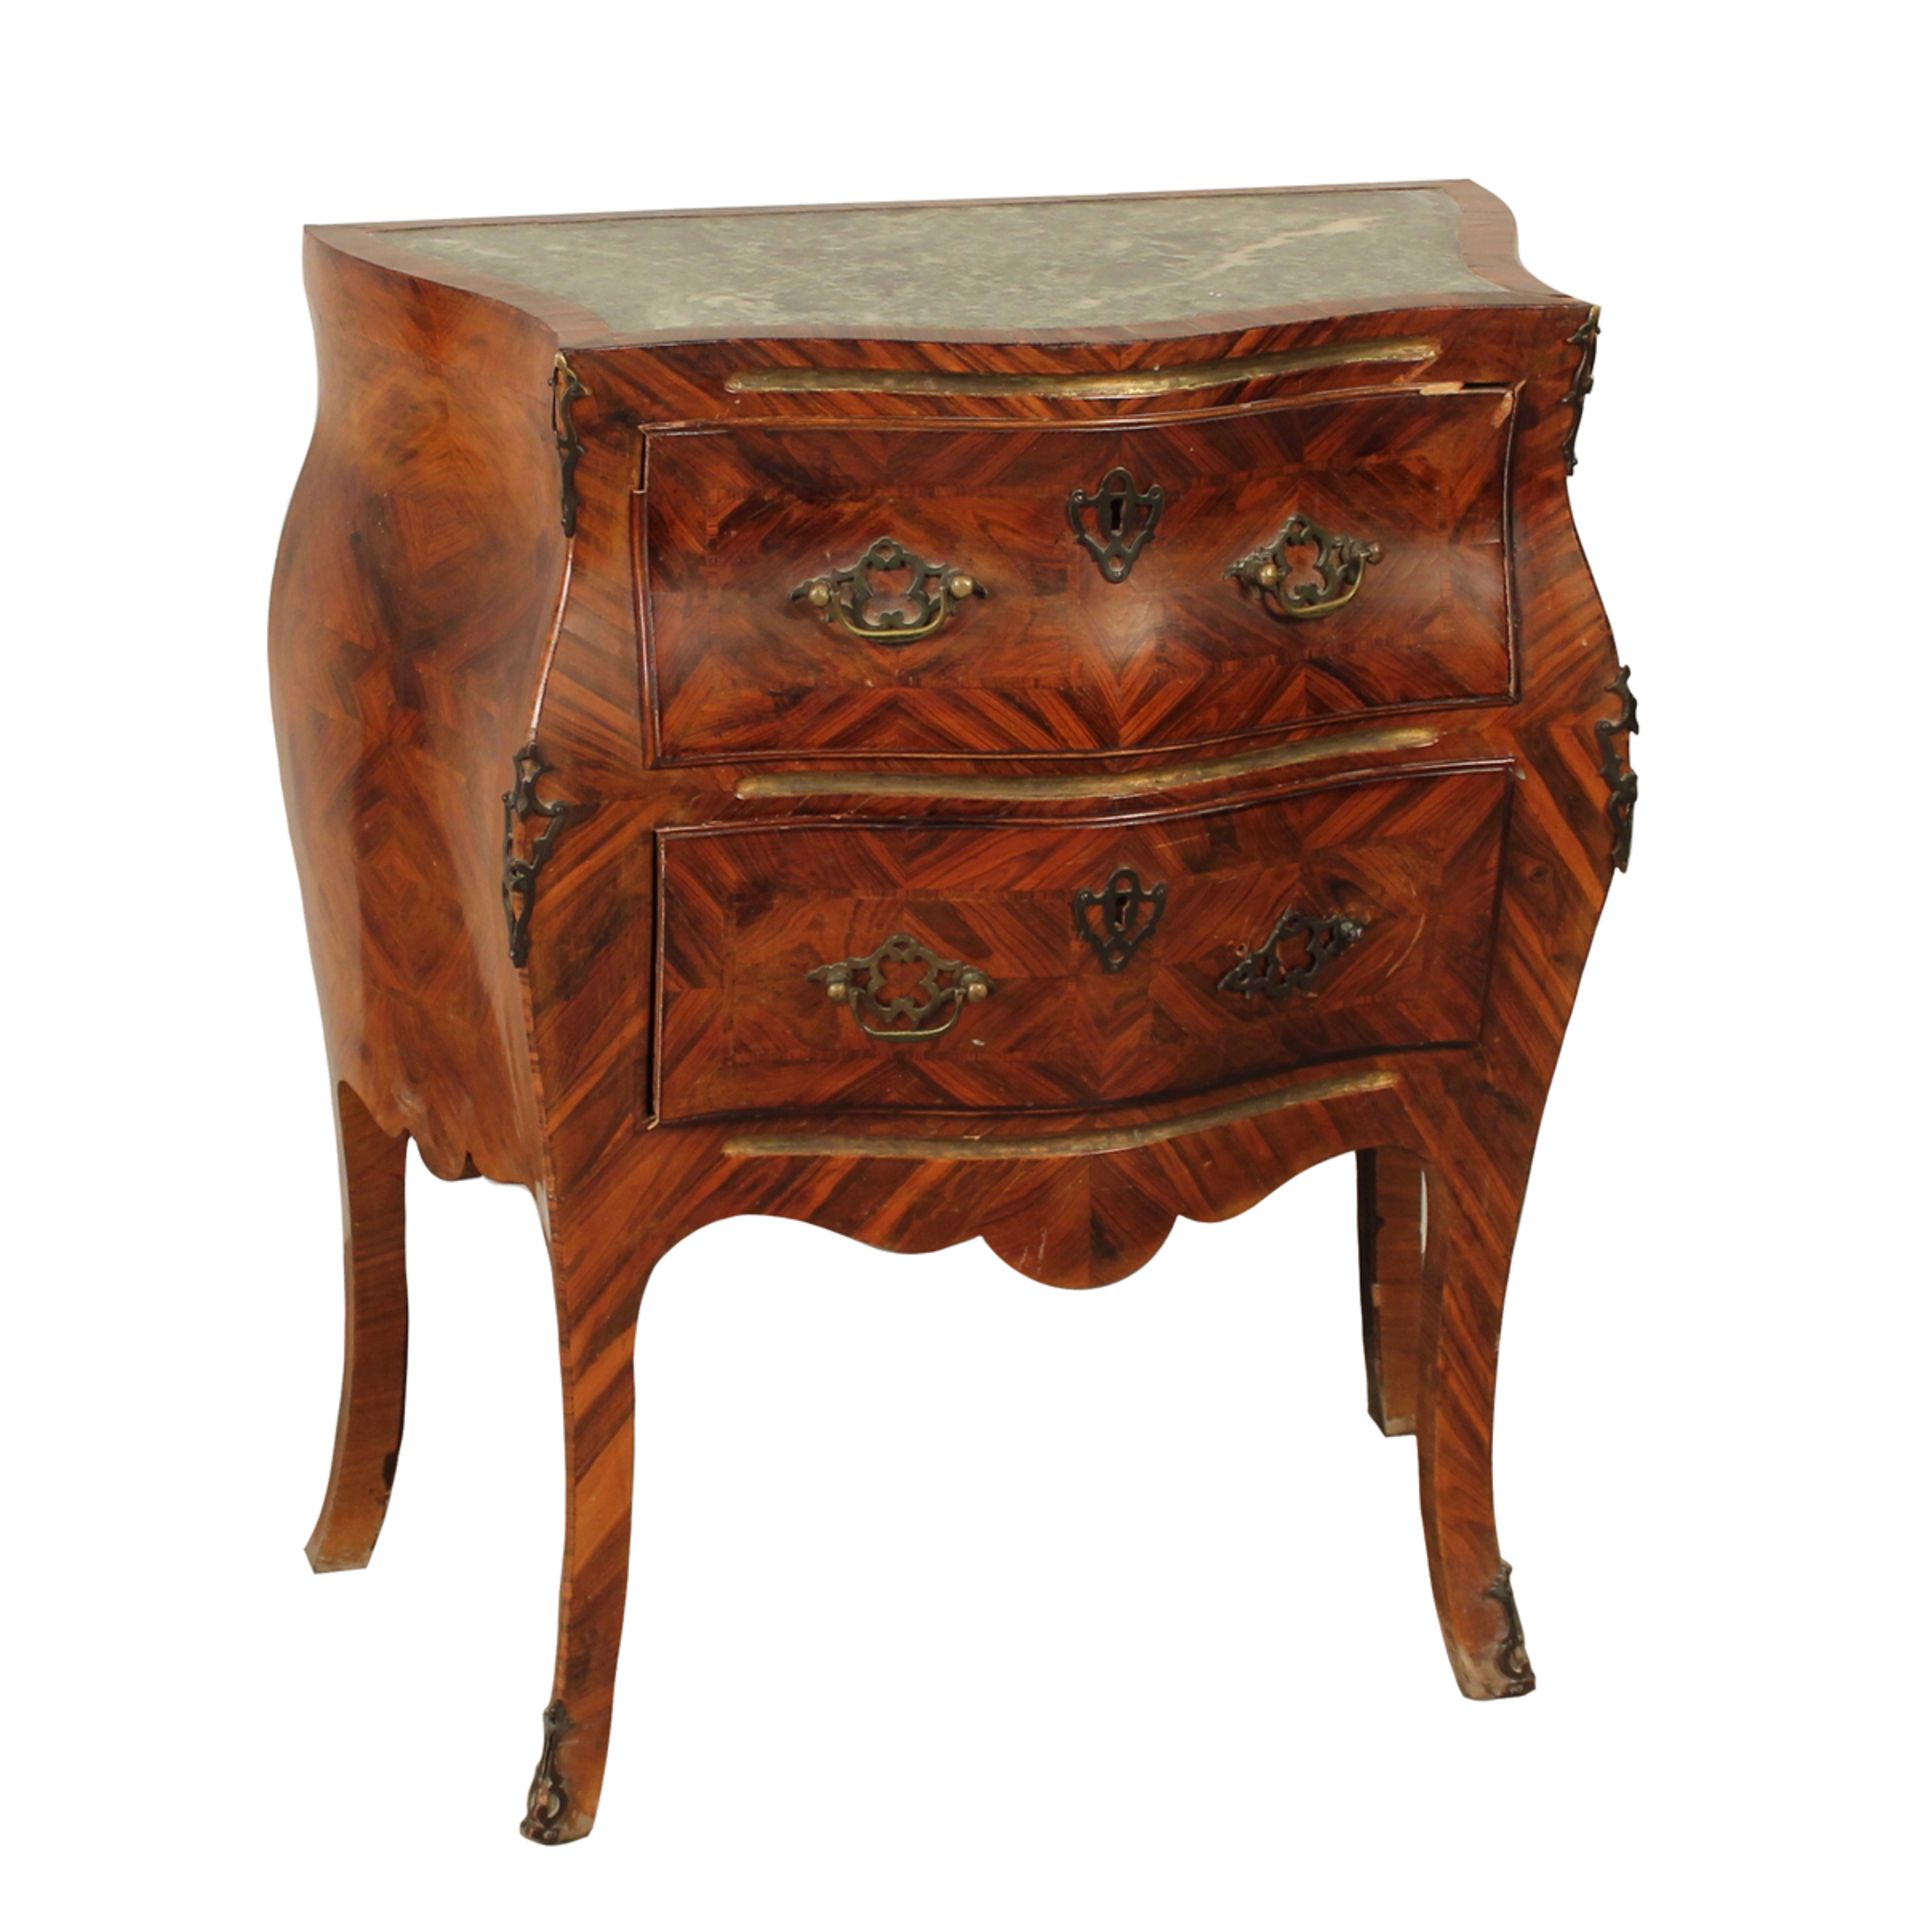 PICCOLO CASSETTONE A DUE CASSETTI- SMALL COMMODE WITH TWO DRAWERS